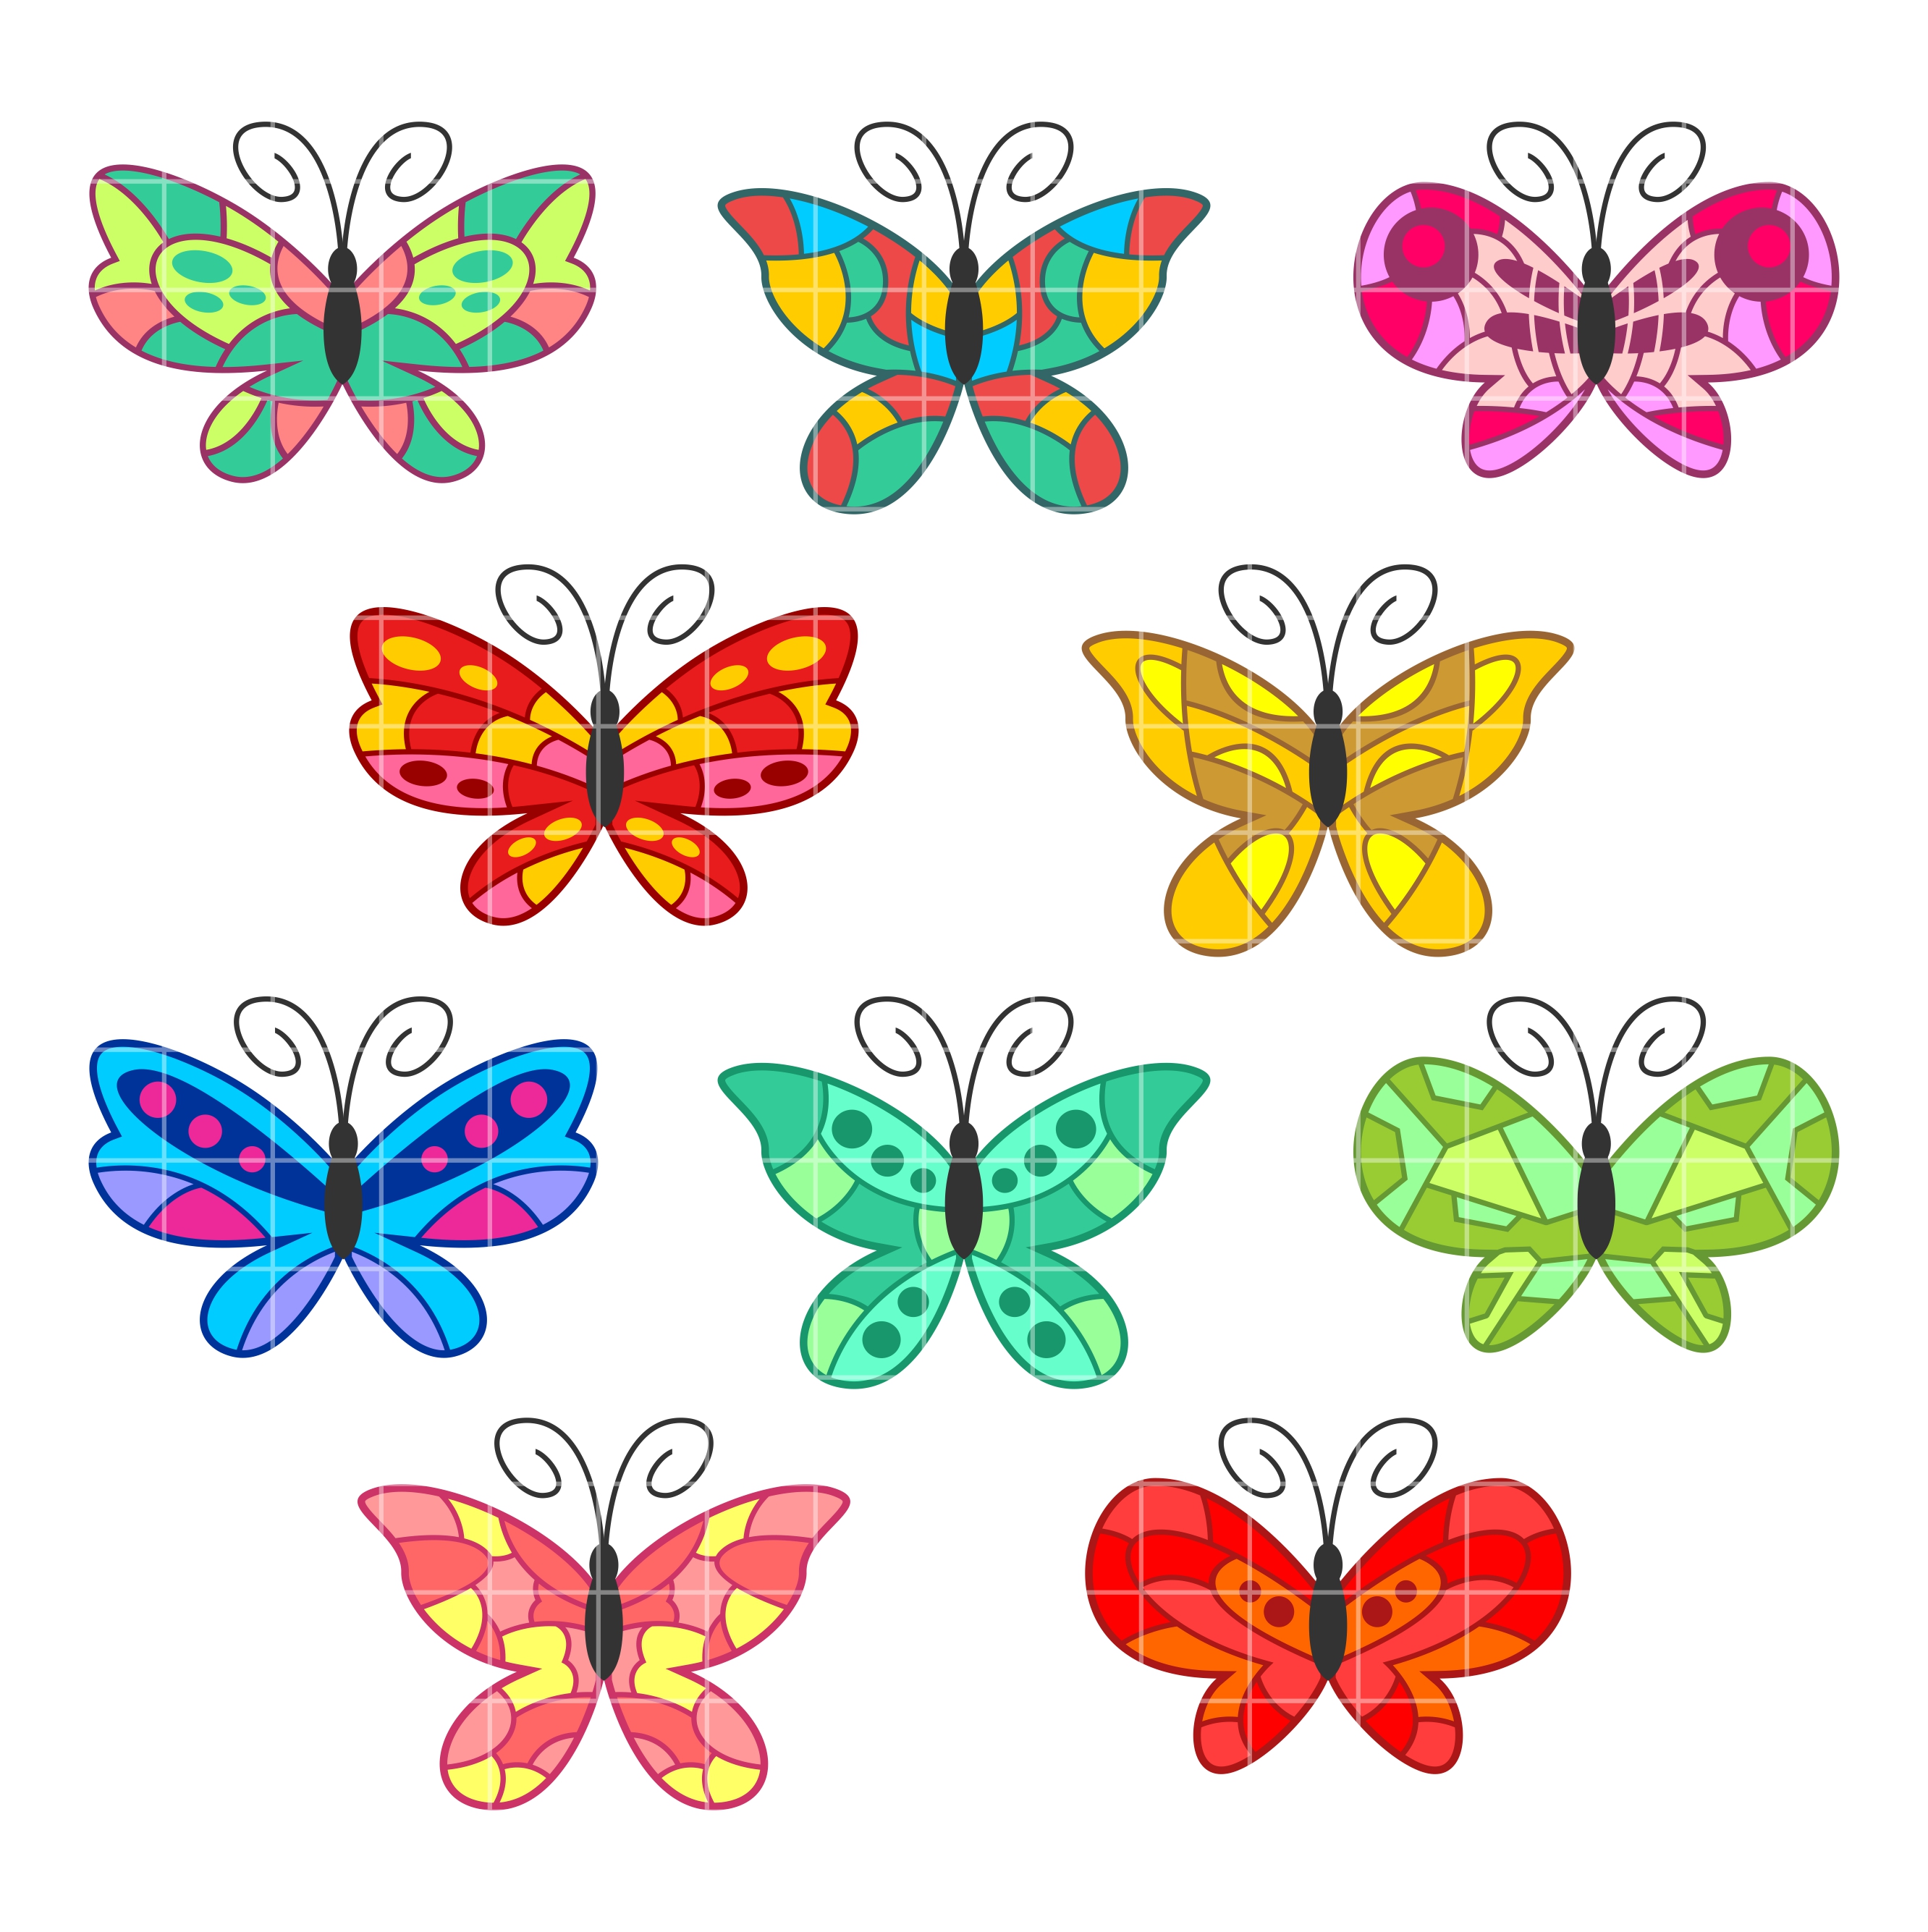 Butterflies colorful butterfly designs clipart clipartall